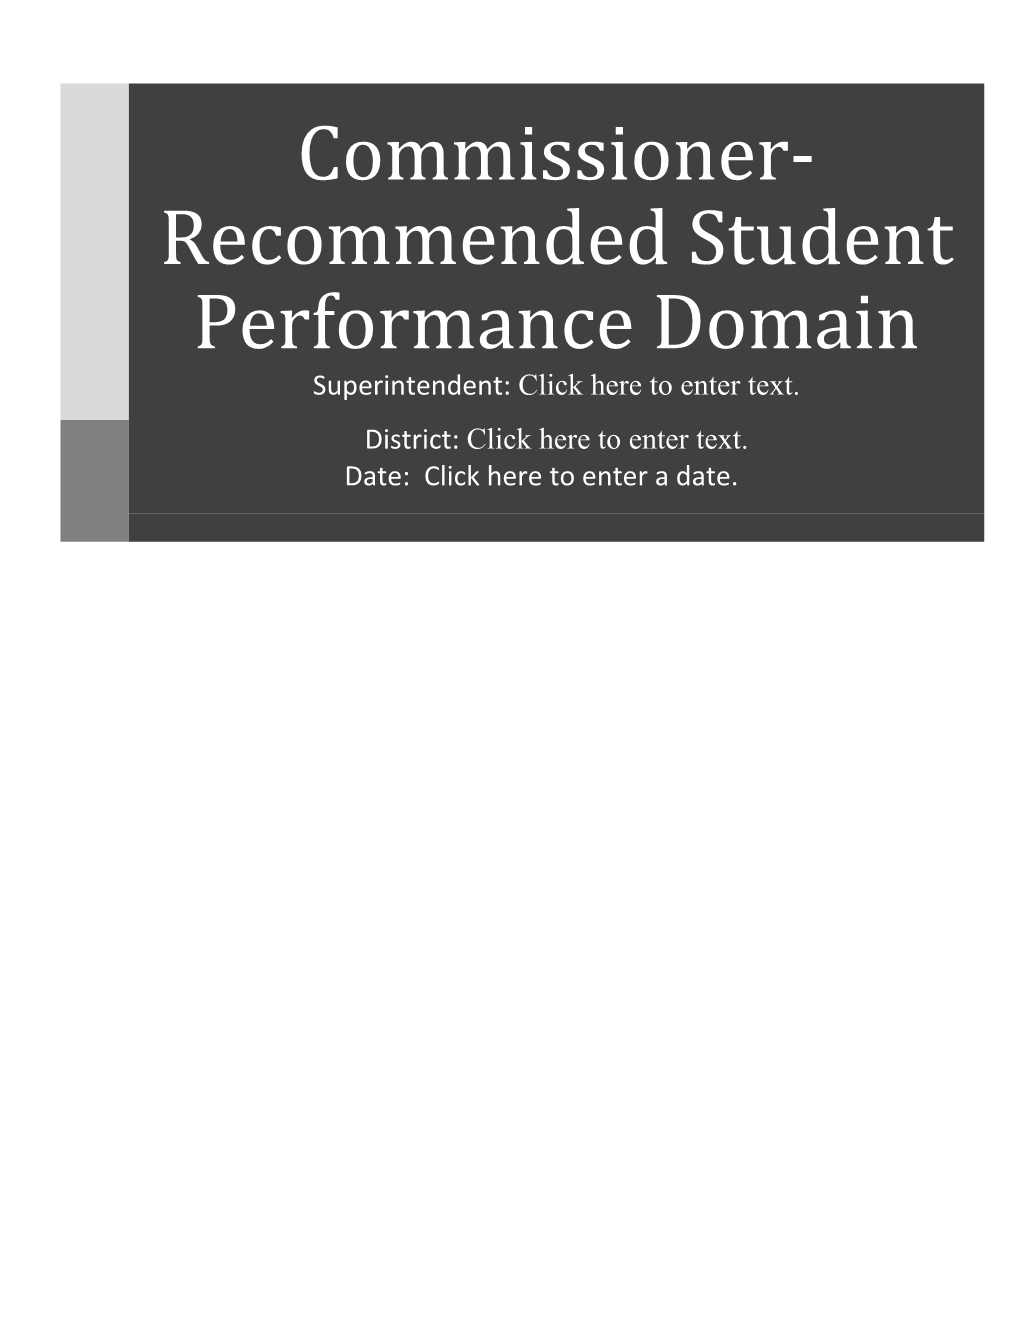 Commissioner-Recommended Student Performance Domain